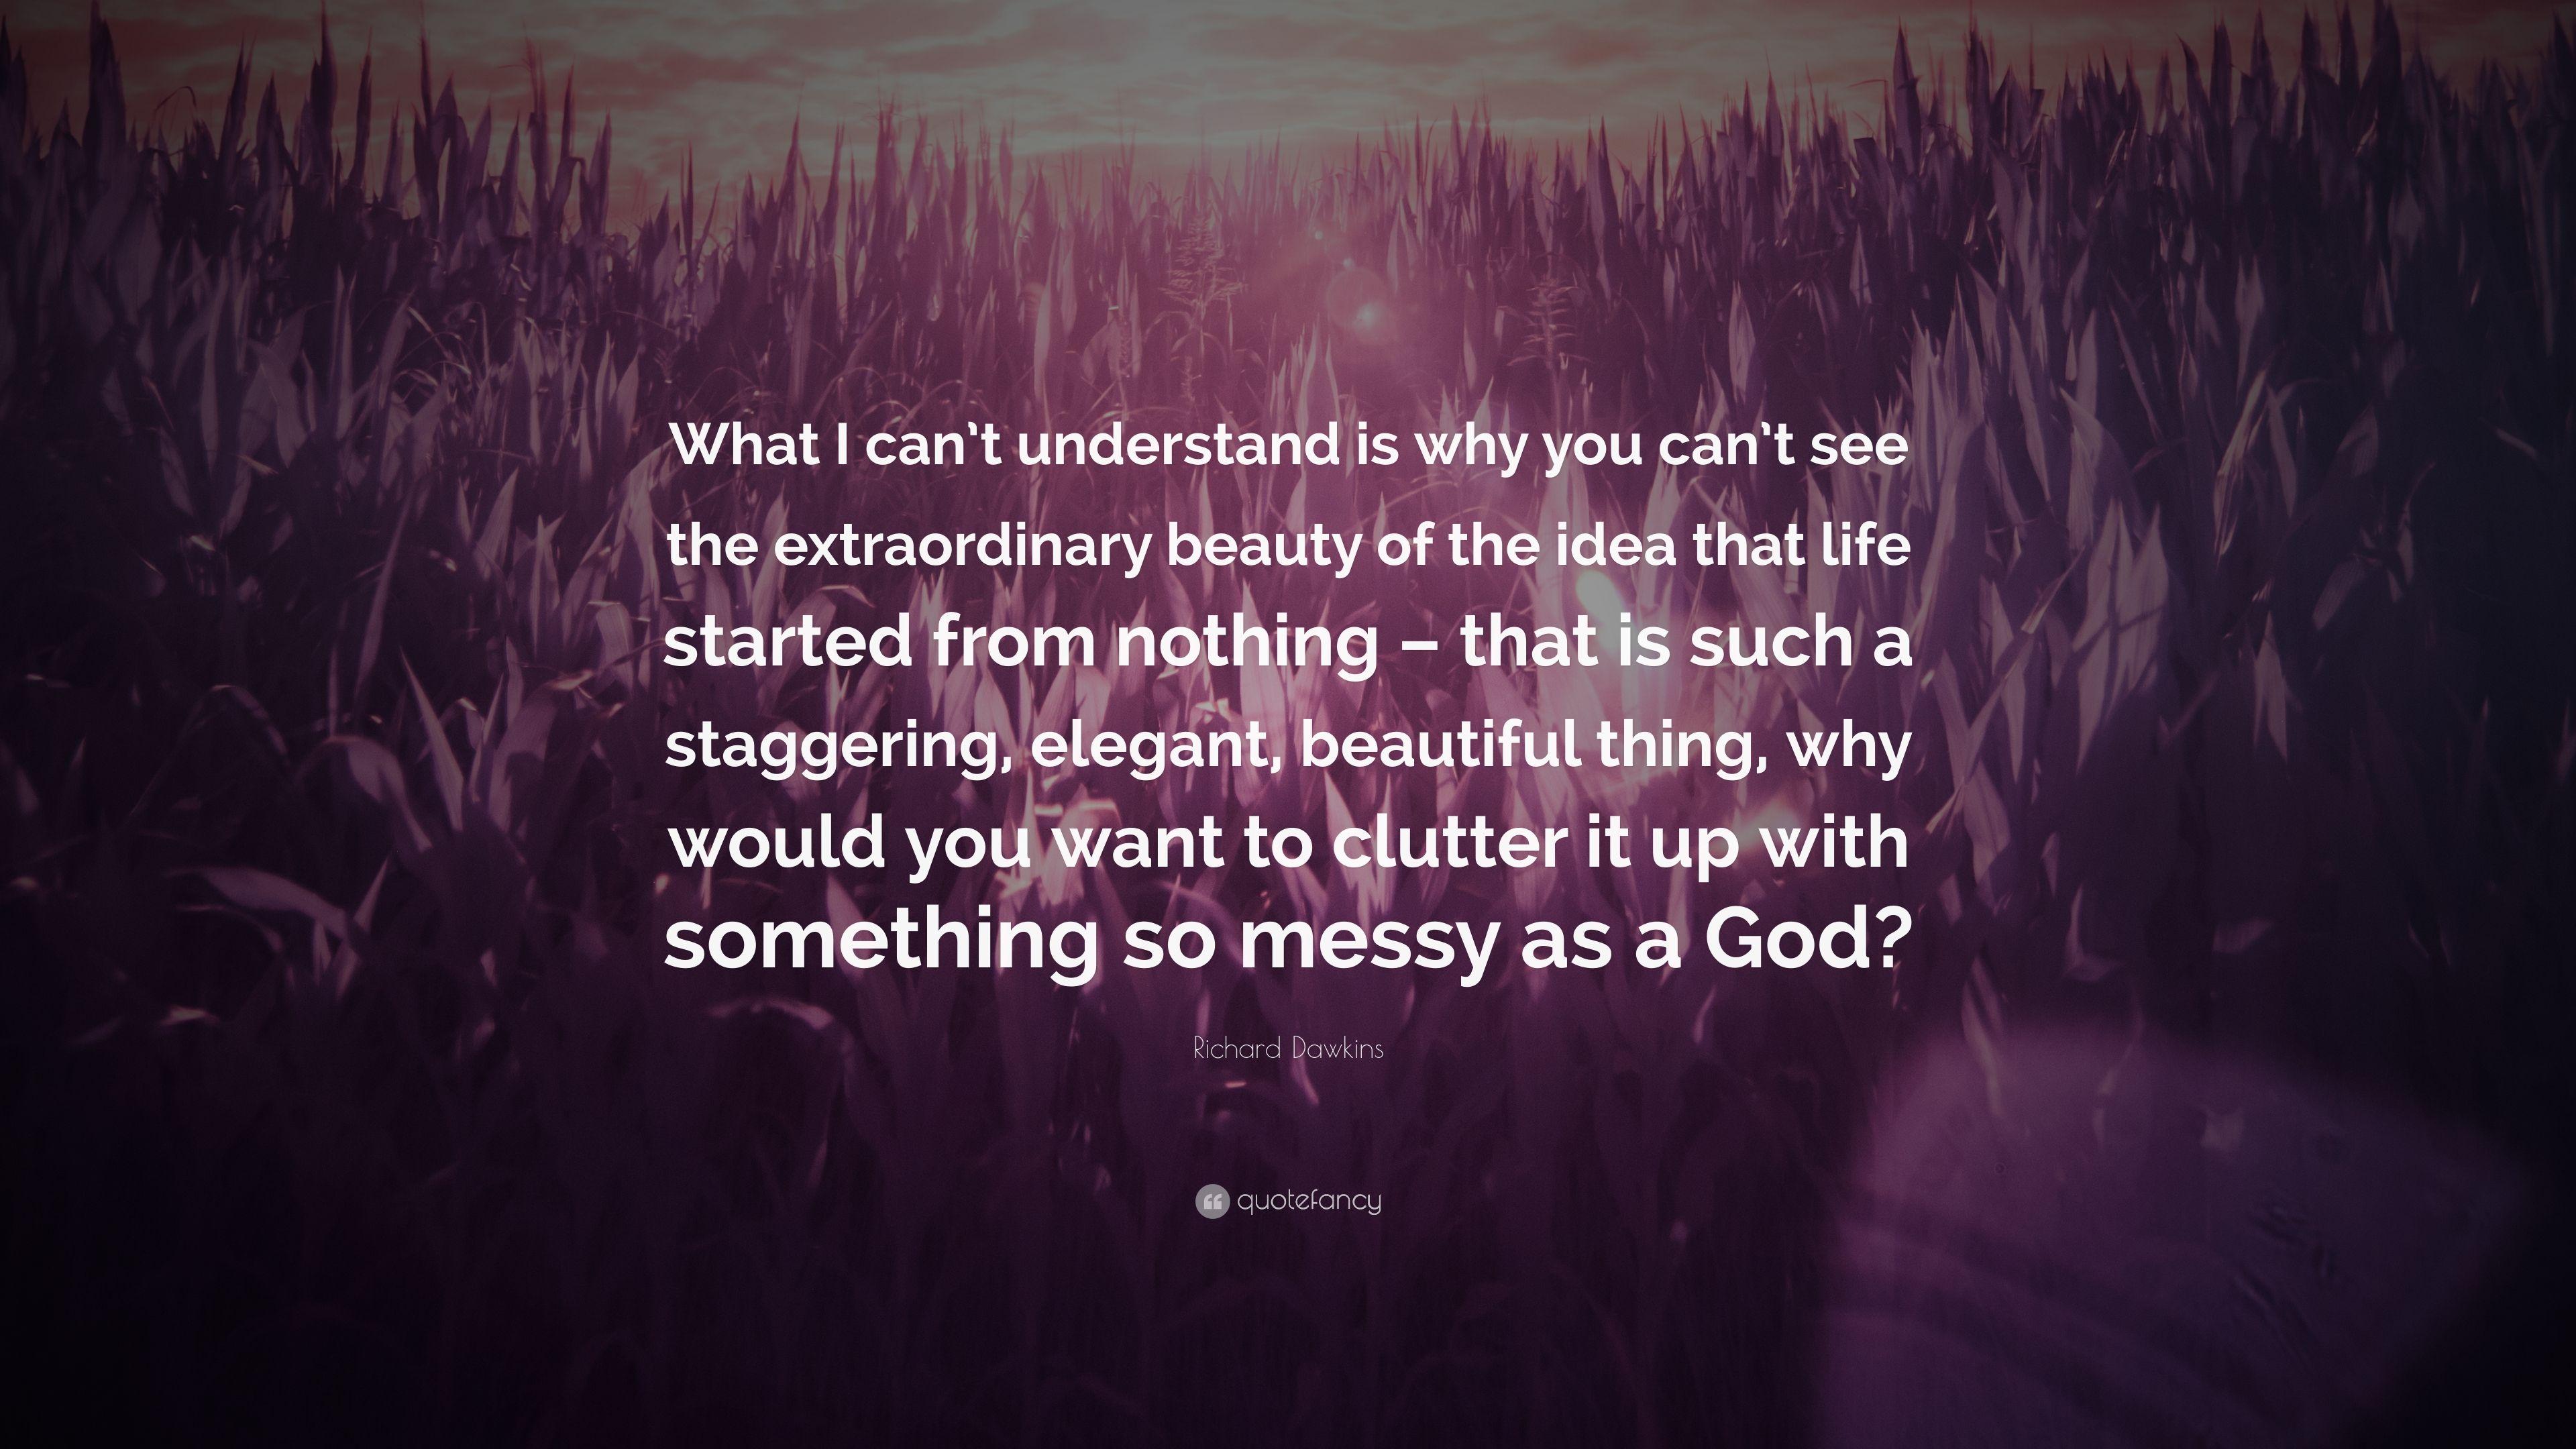 Richard Dawkins Quote: “What I can't understand is why you